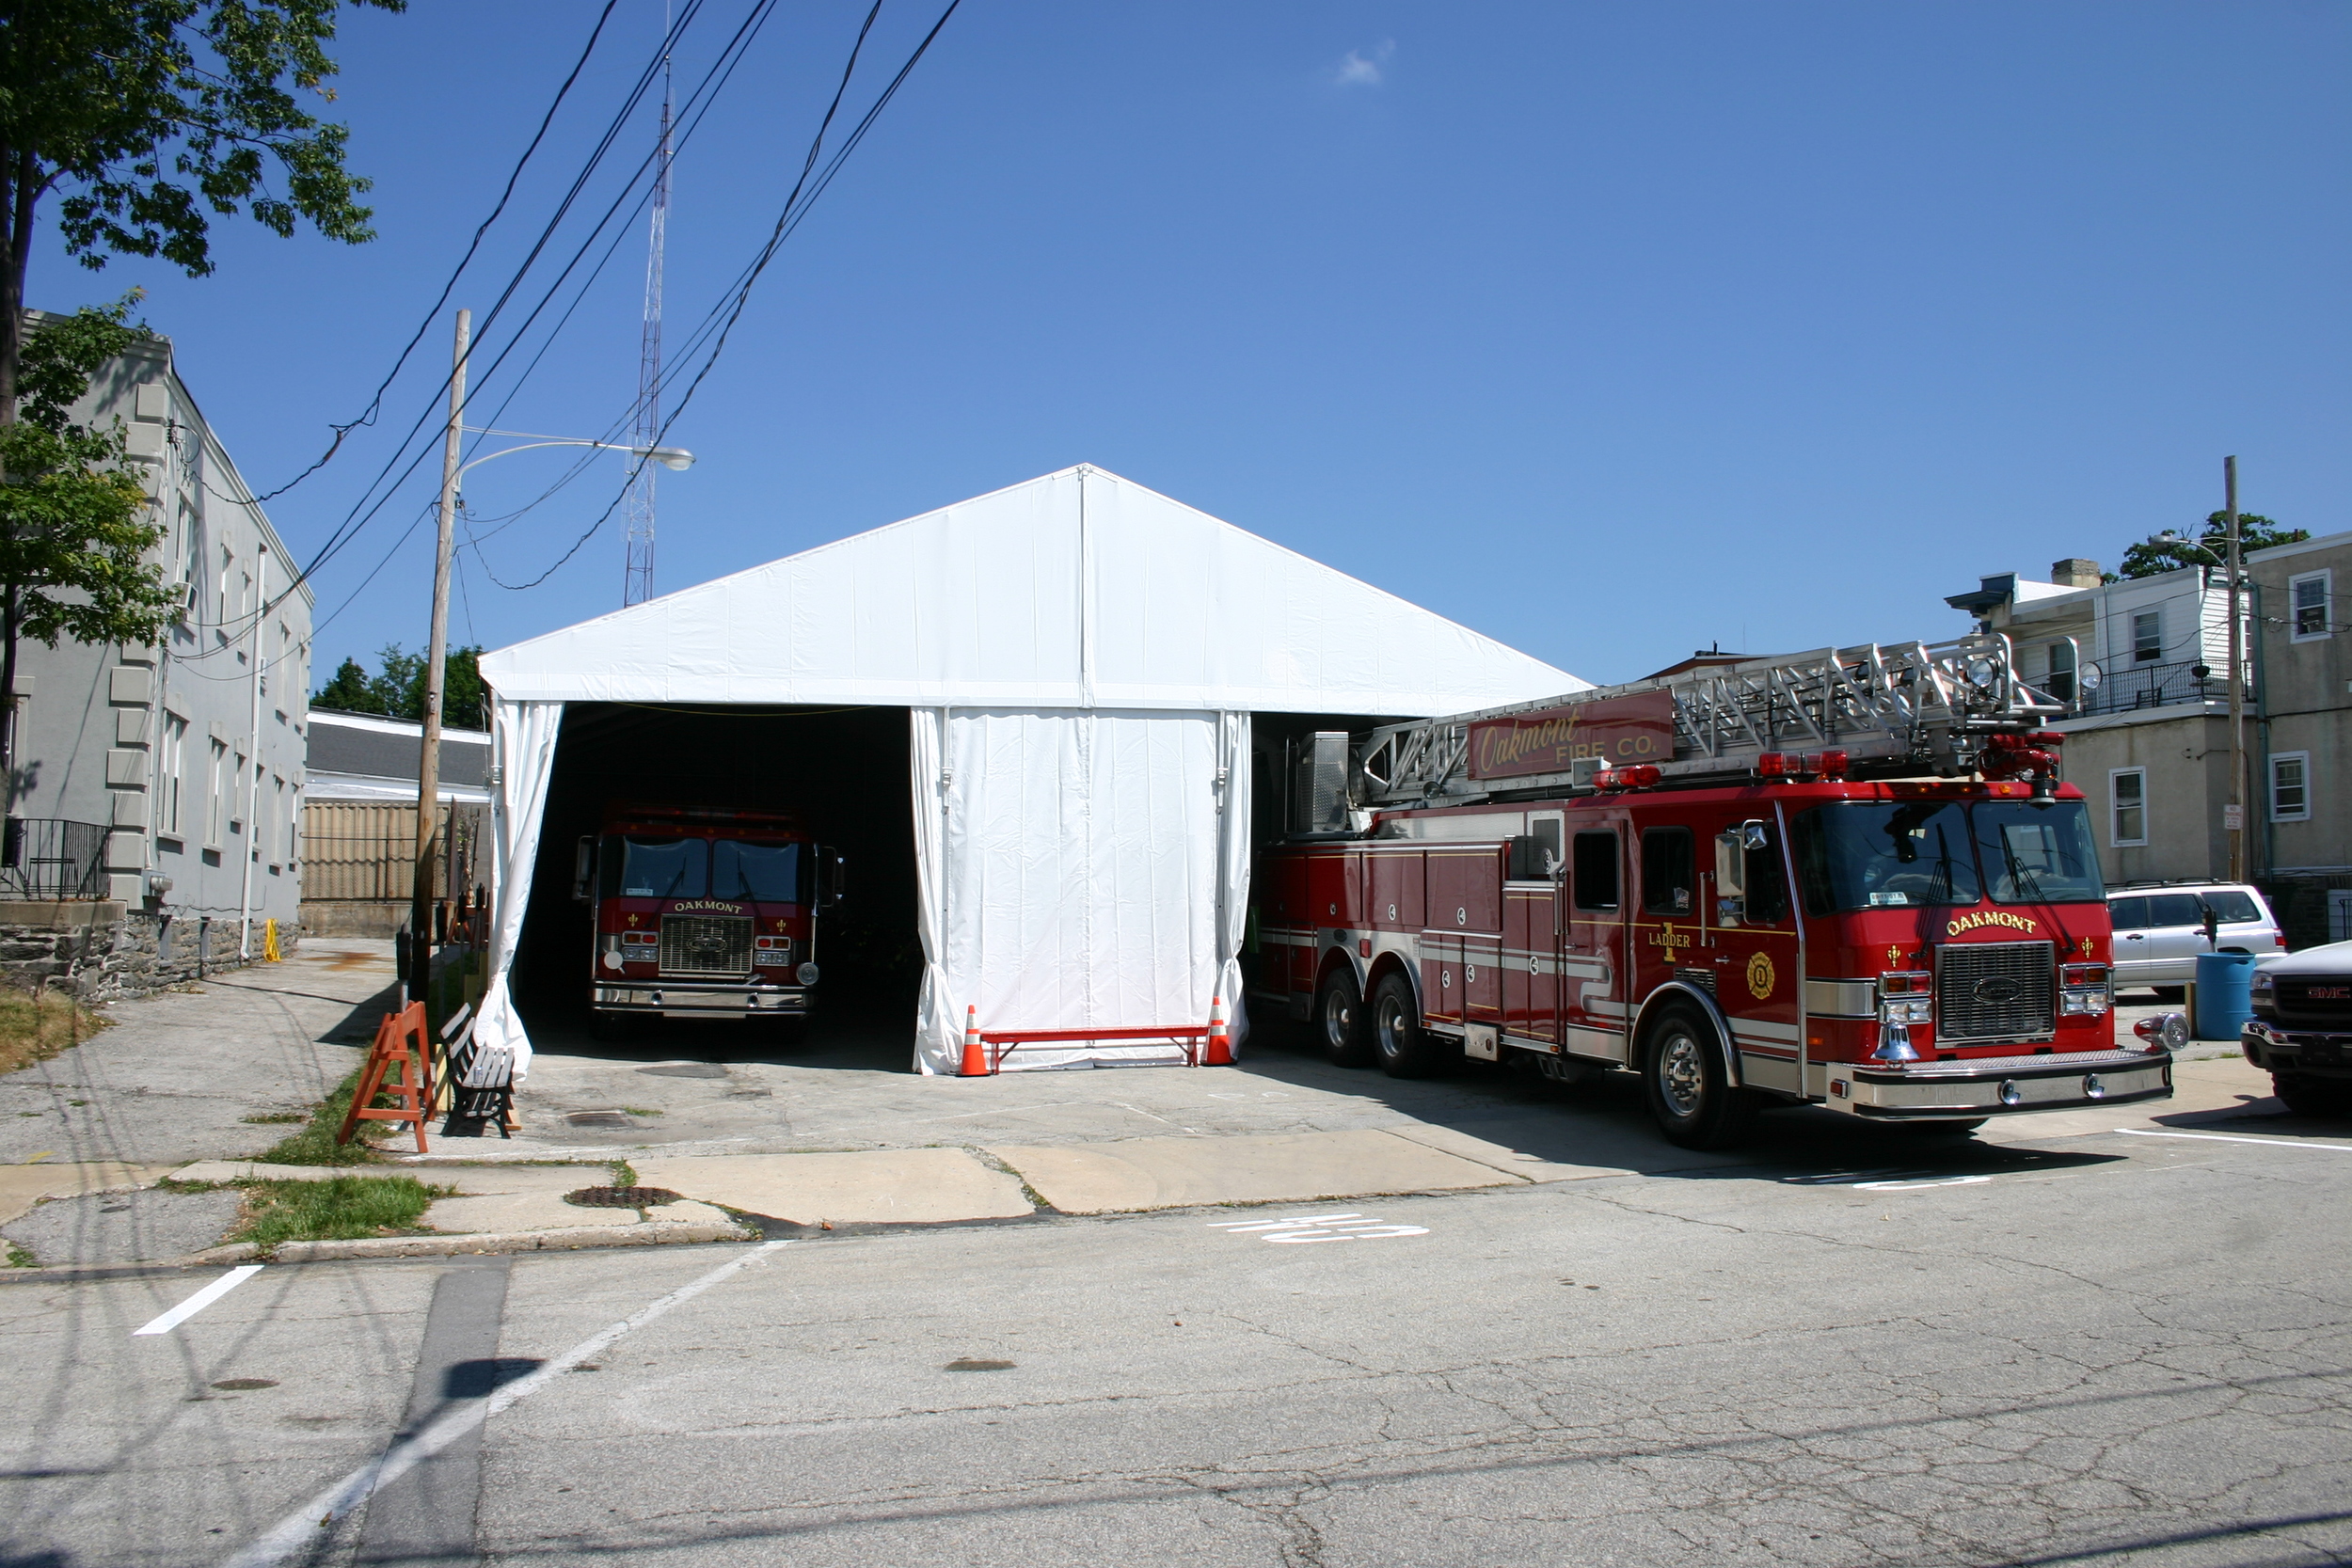 Temporary Firehouse Tent